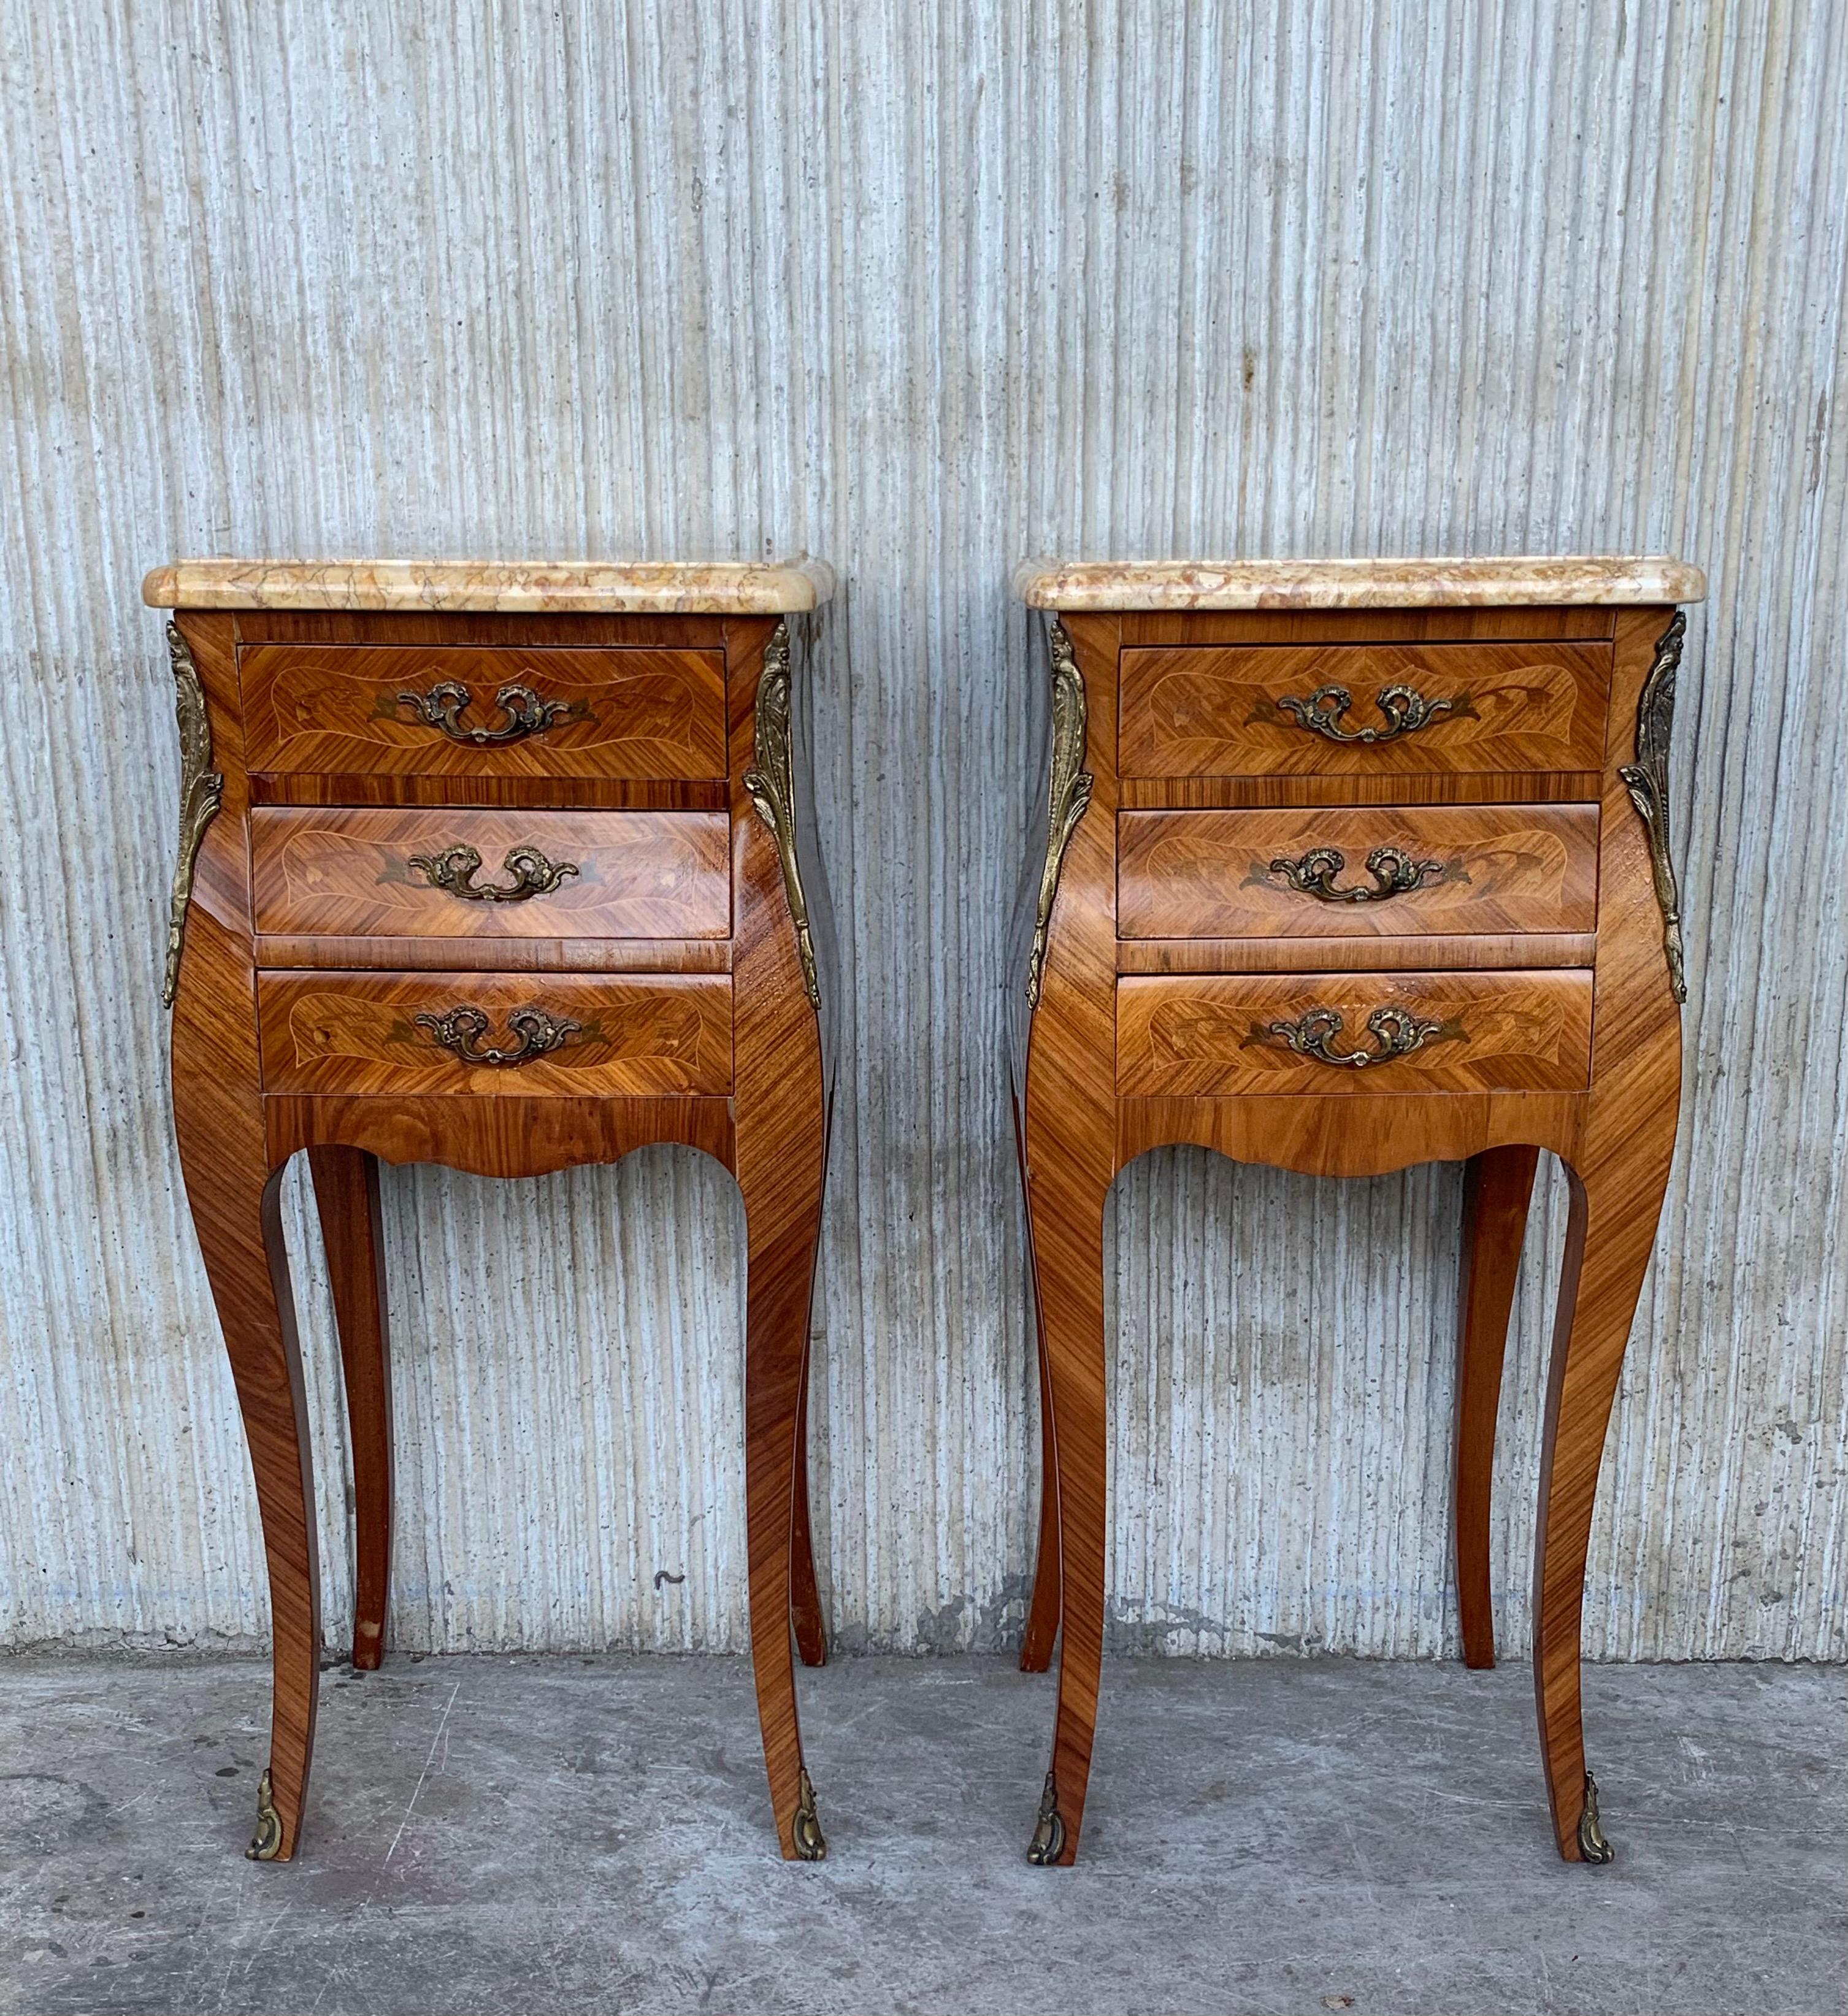 Matched Louis XV style kingwood nightstands, each with three drawers featuring floral Marquetry on a bookmatched kingwood ground. The pieces have a floral Marquetry in both sides and retain their original and beautiful marble tops and are